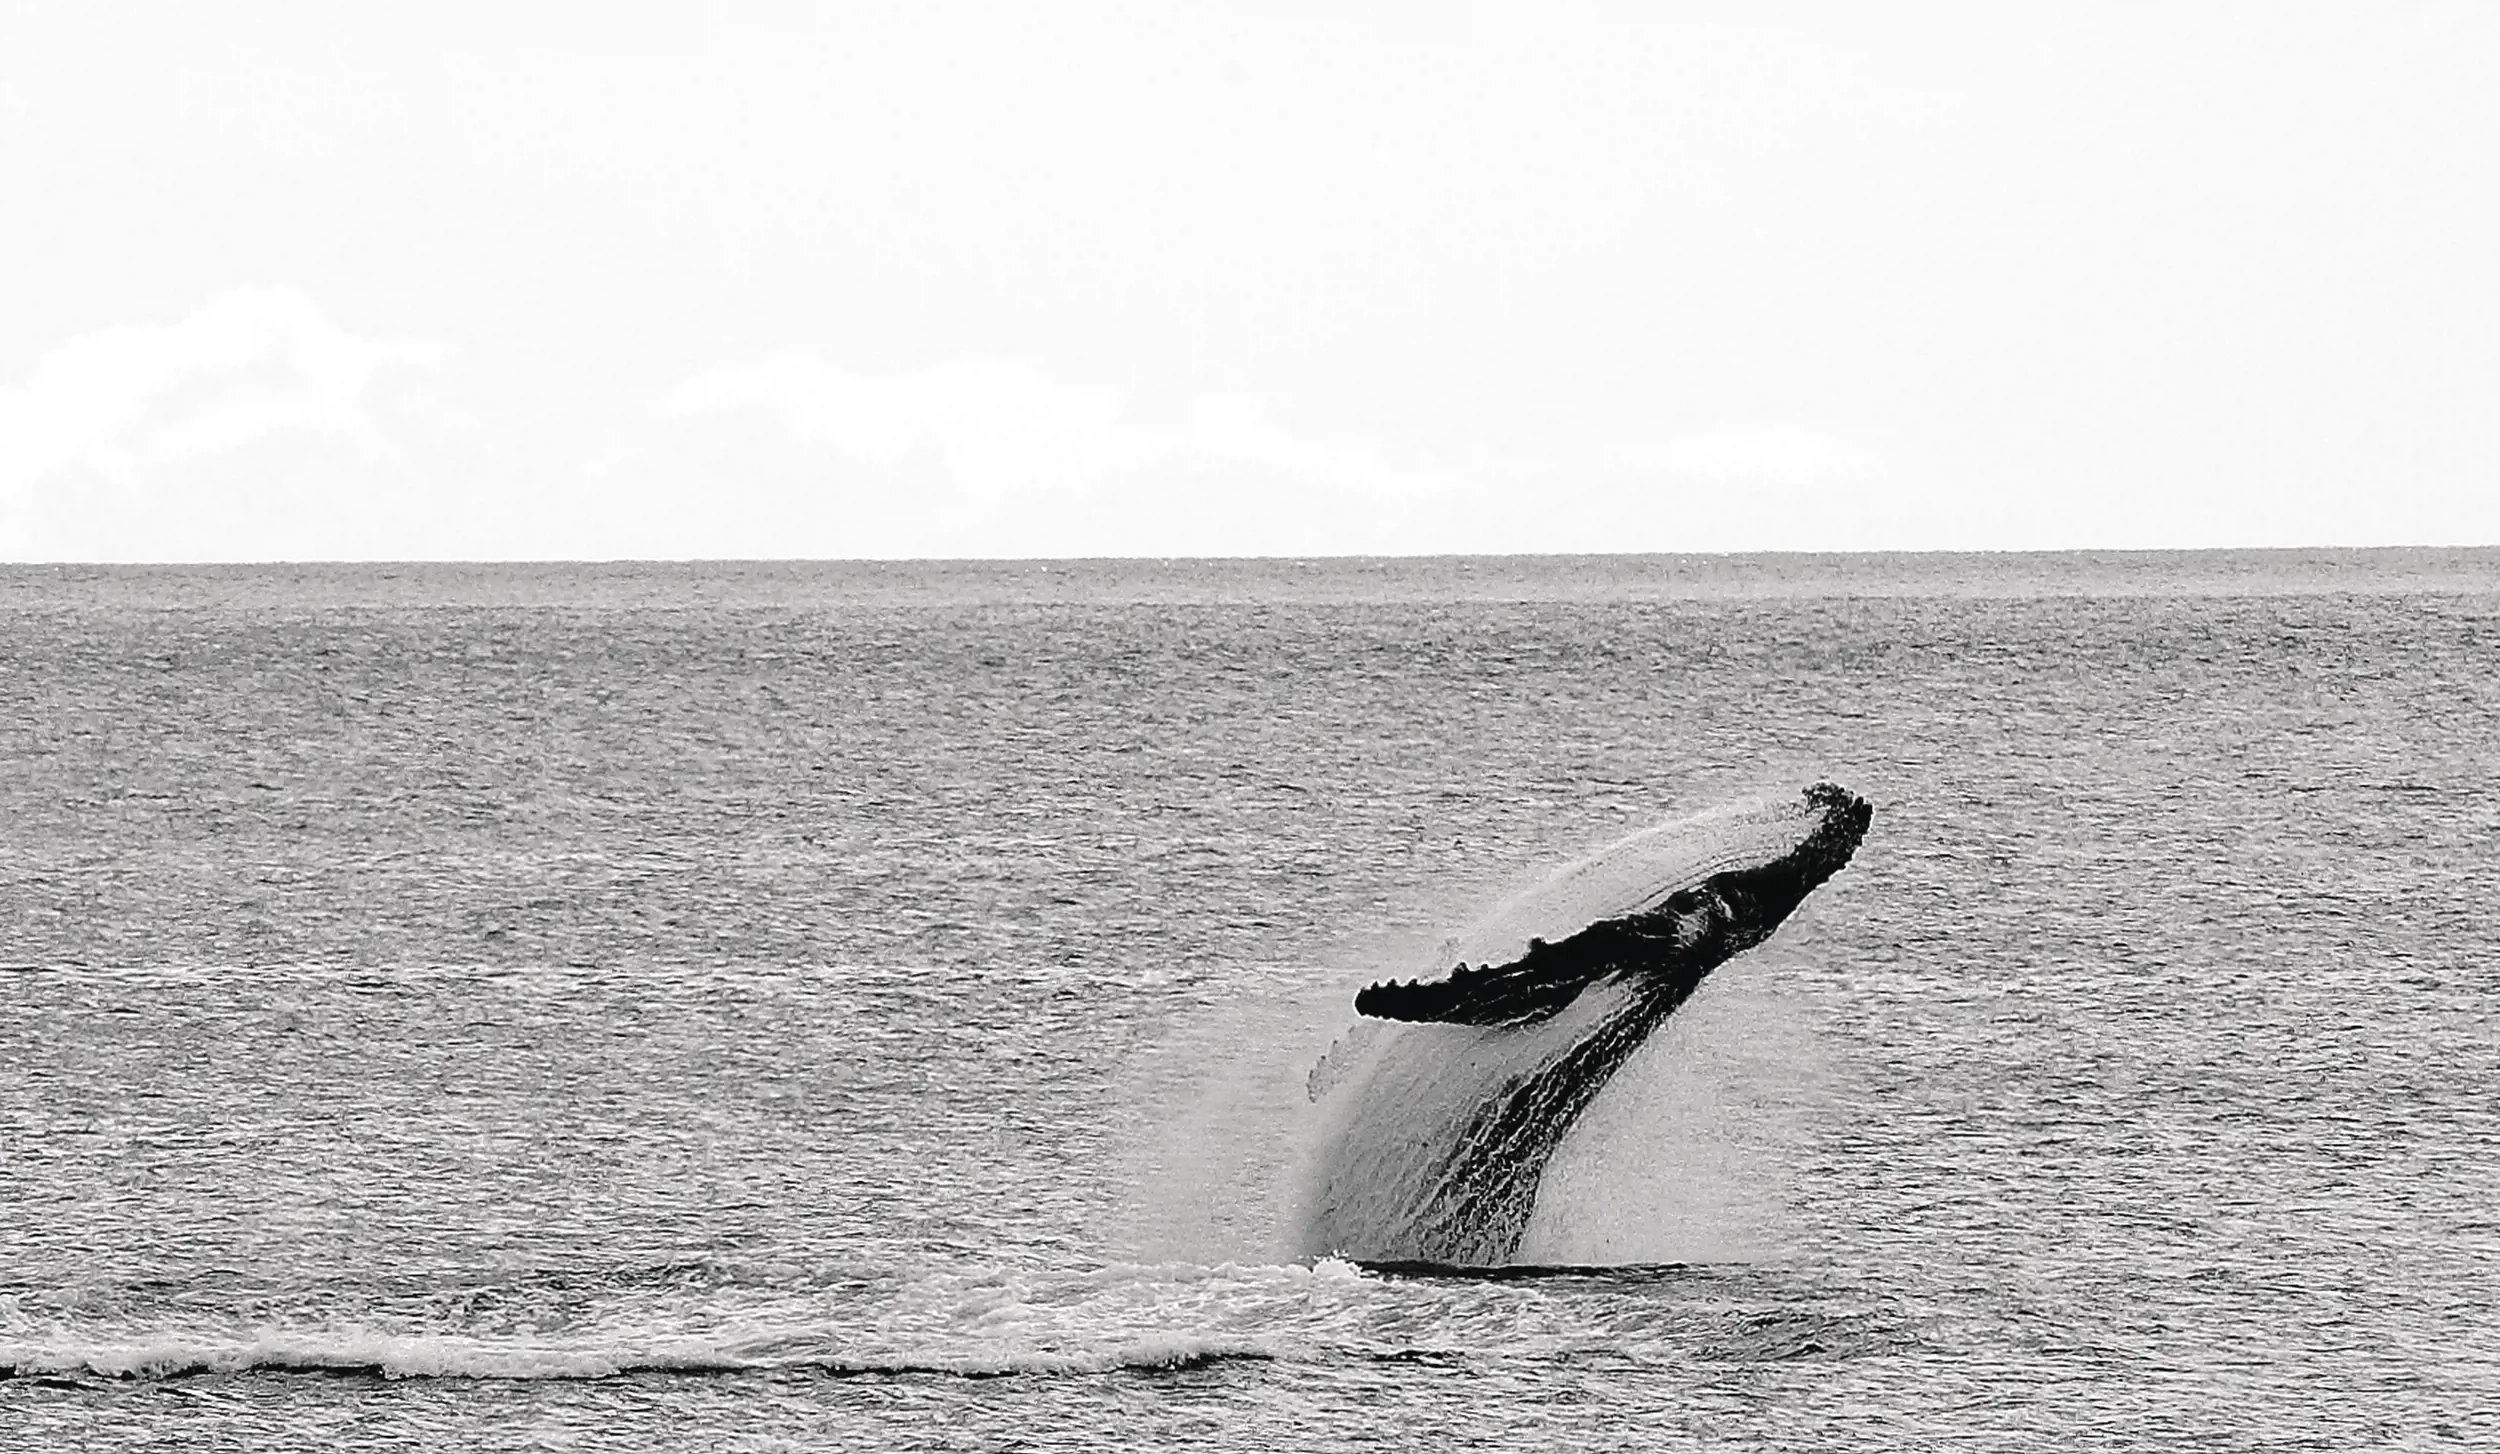 A whale breeches the surface of the water.